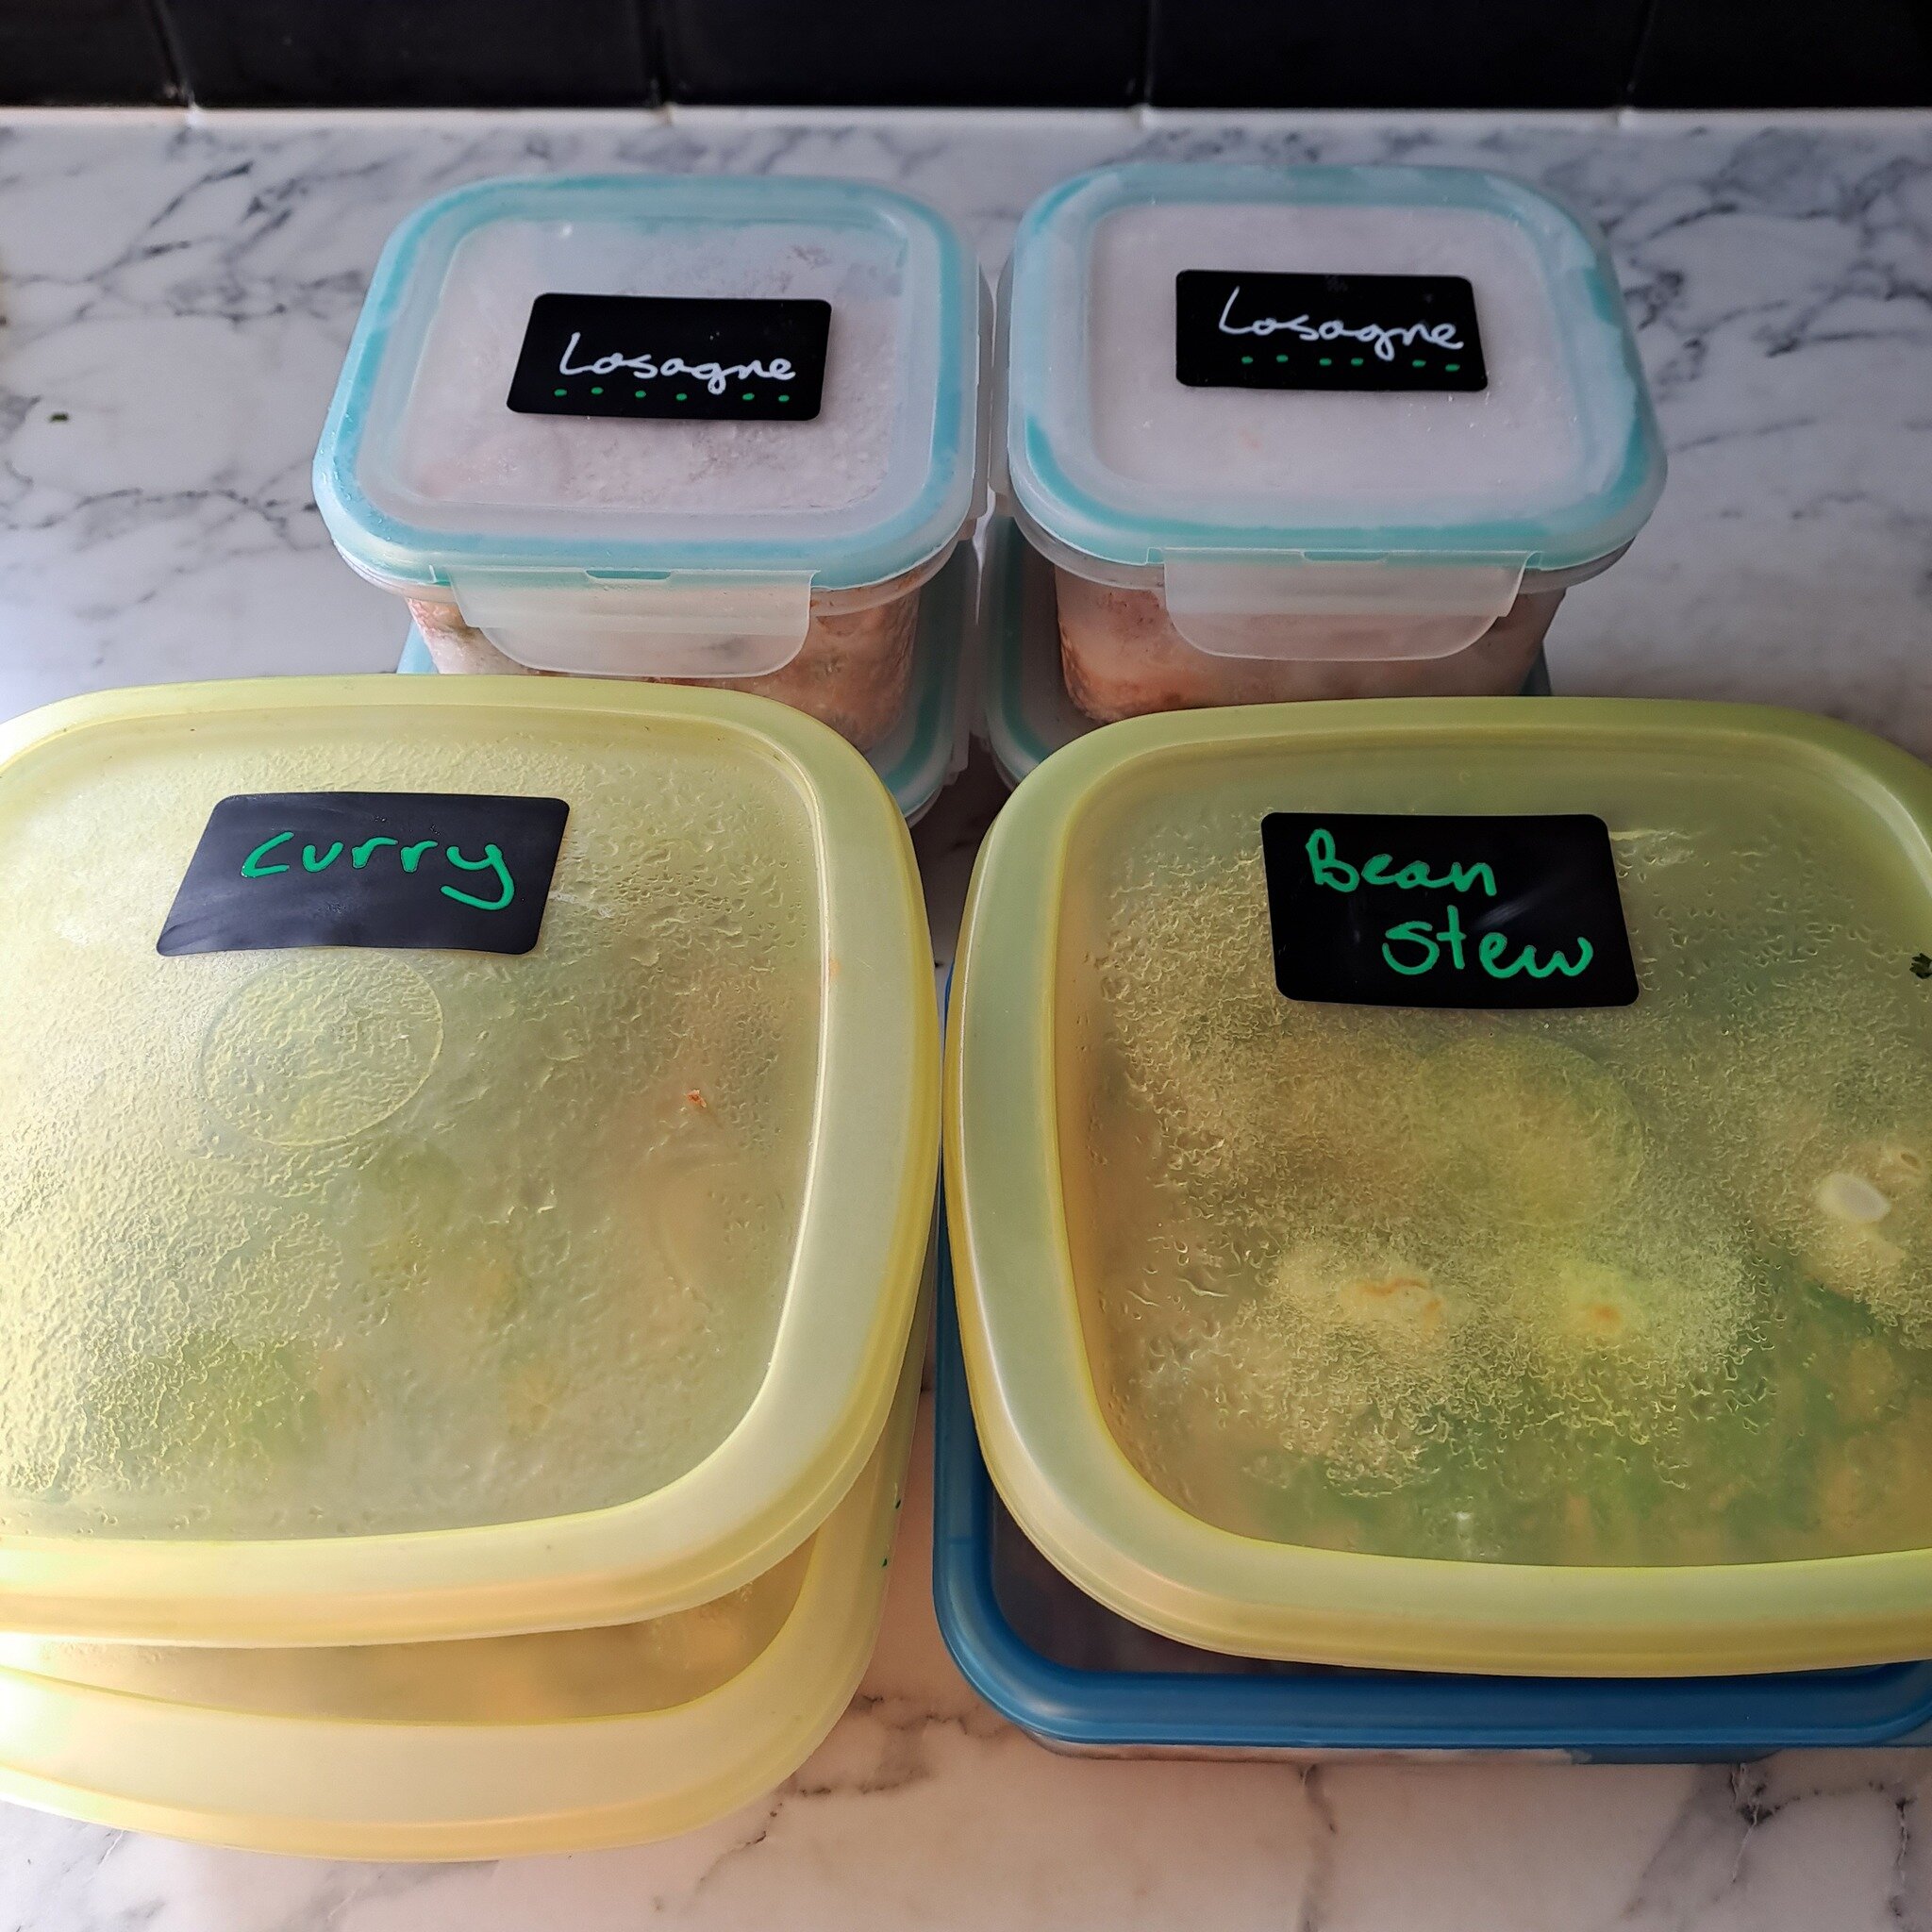 Do you batch cook?

I've had a very busy month this June and I've been hugely grateful to &quot;past Amy&quot; for doing lots of batch cooking when I had the time. 

I know that I feel my best when I eat healthy meals made from scratch, but there isn